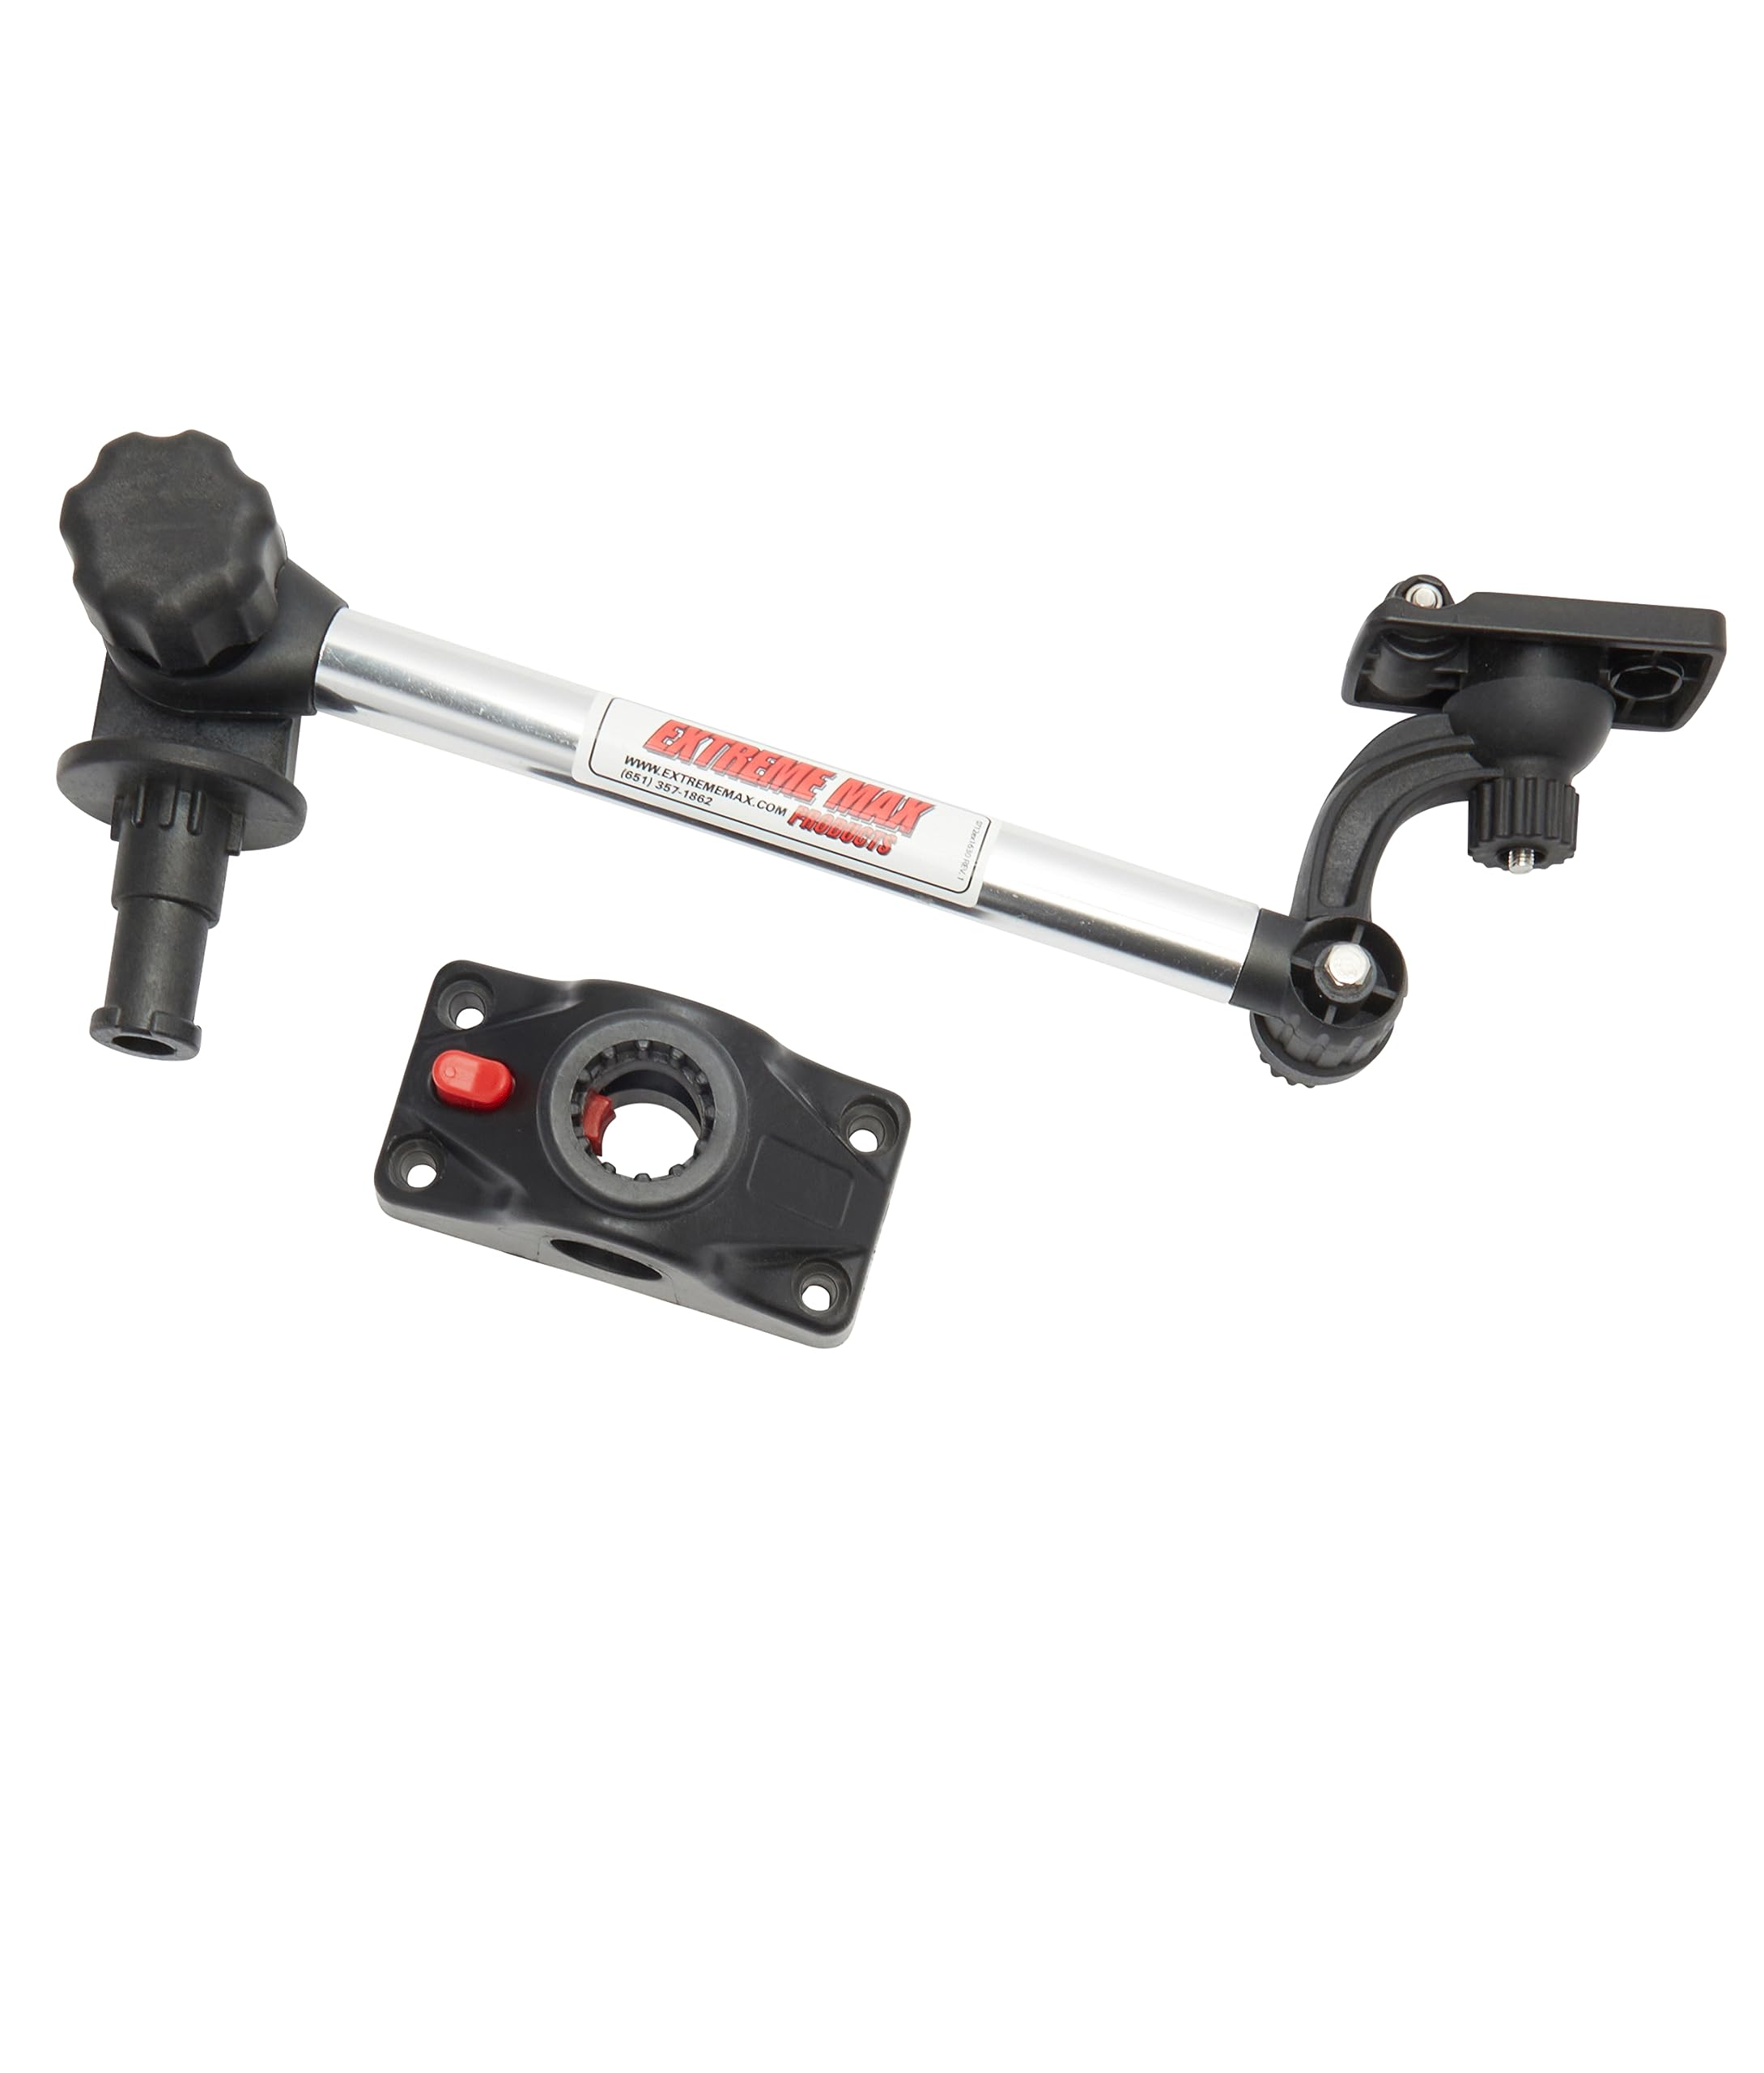 Extreme Max 3006.8672 Standard Mounting Arm Boat/Fishing Rod Holder for GoPro Camera - Up to 13